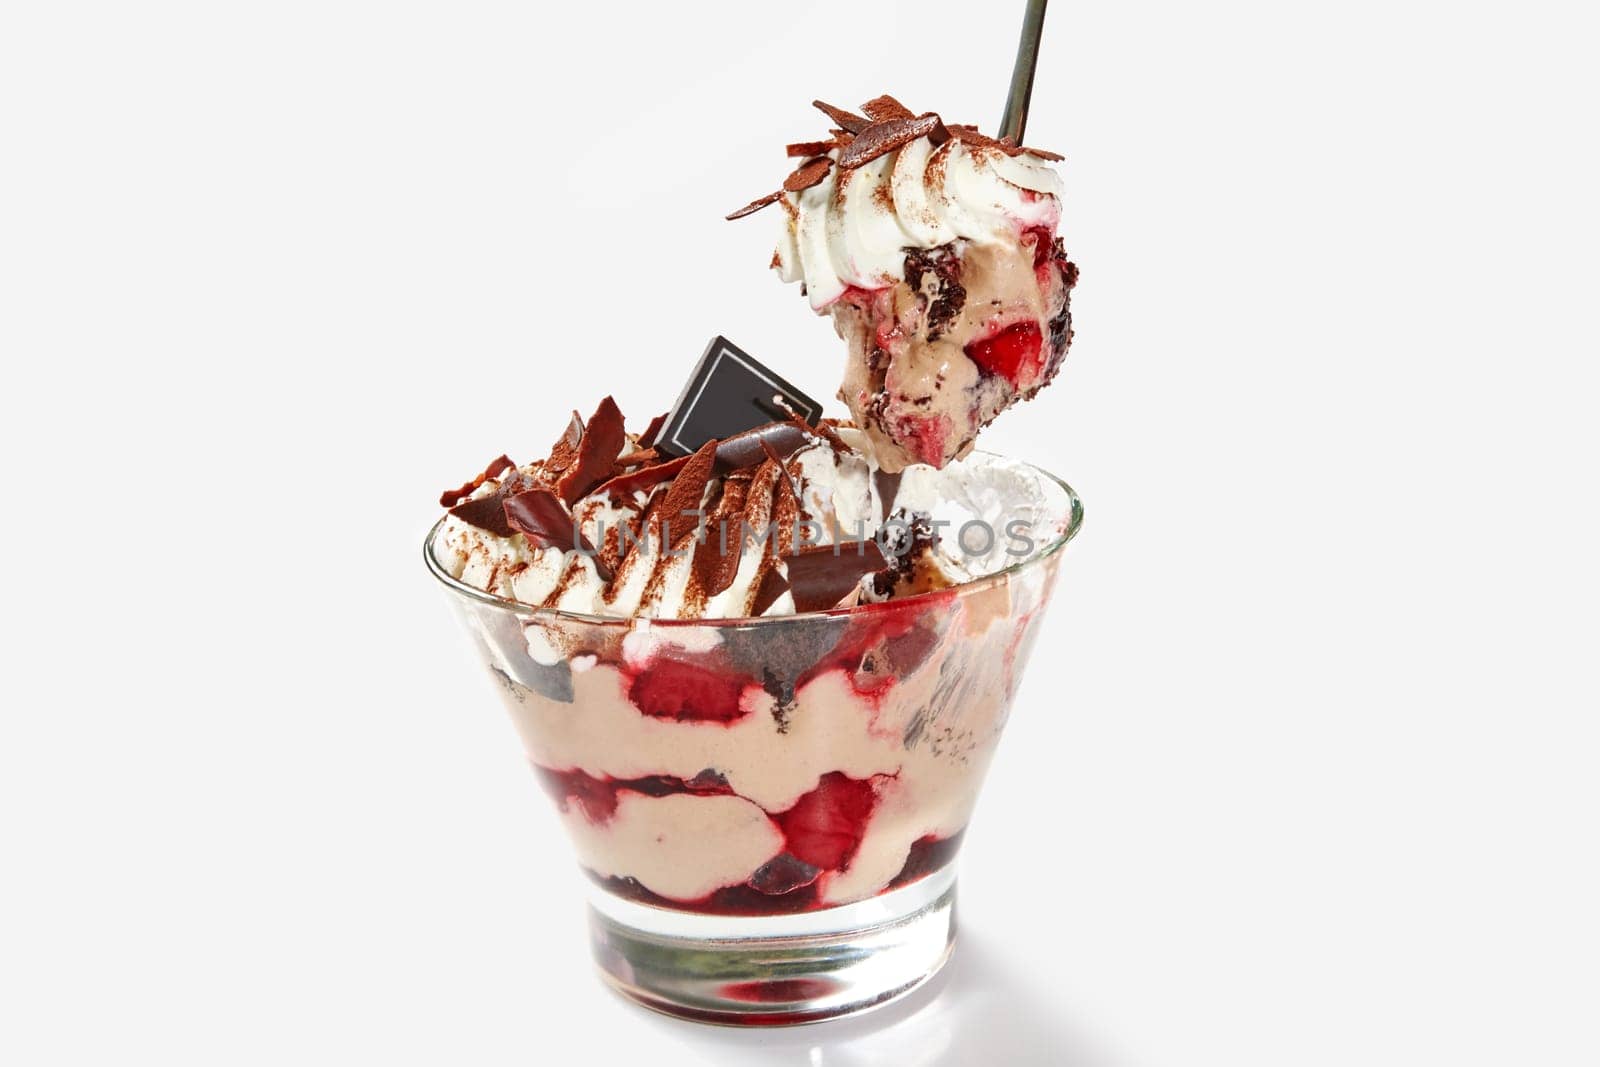 Appetizing layered dessert with chocolate sponge cake, ice cream and fresh cherries topped with whipped cream and chocolate shavings dusted with cocoa served in clear glass